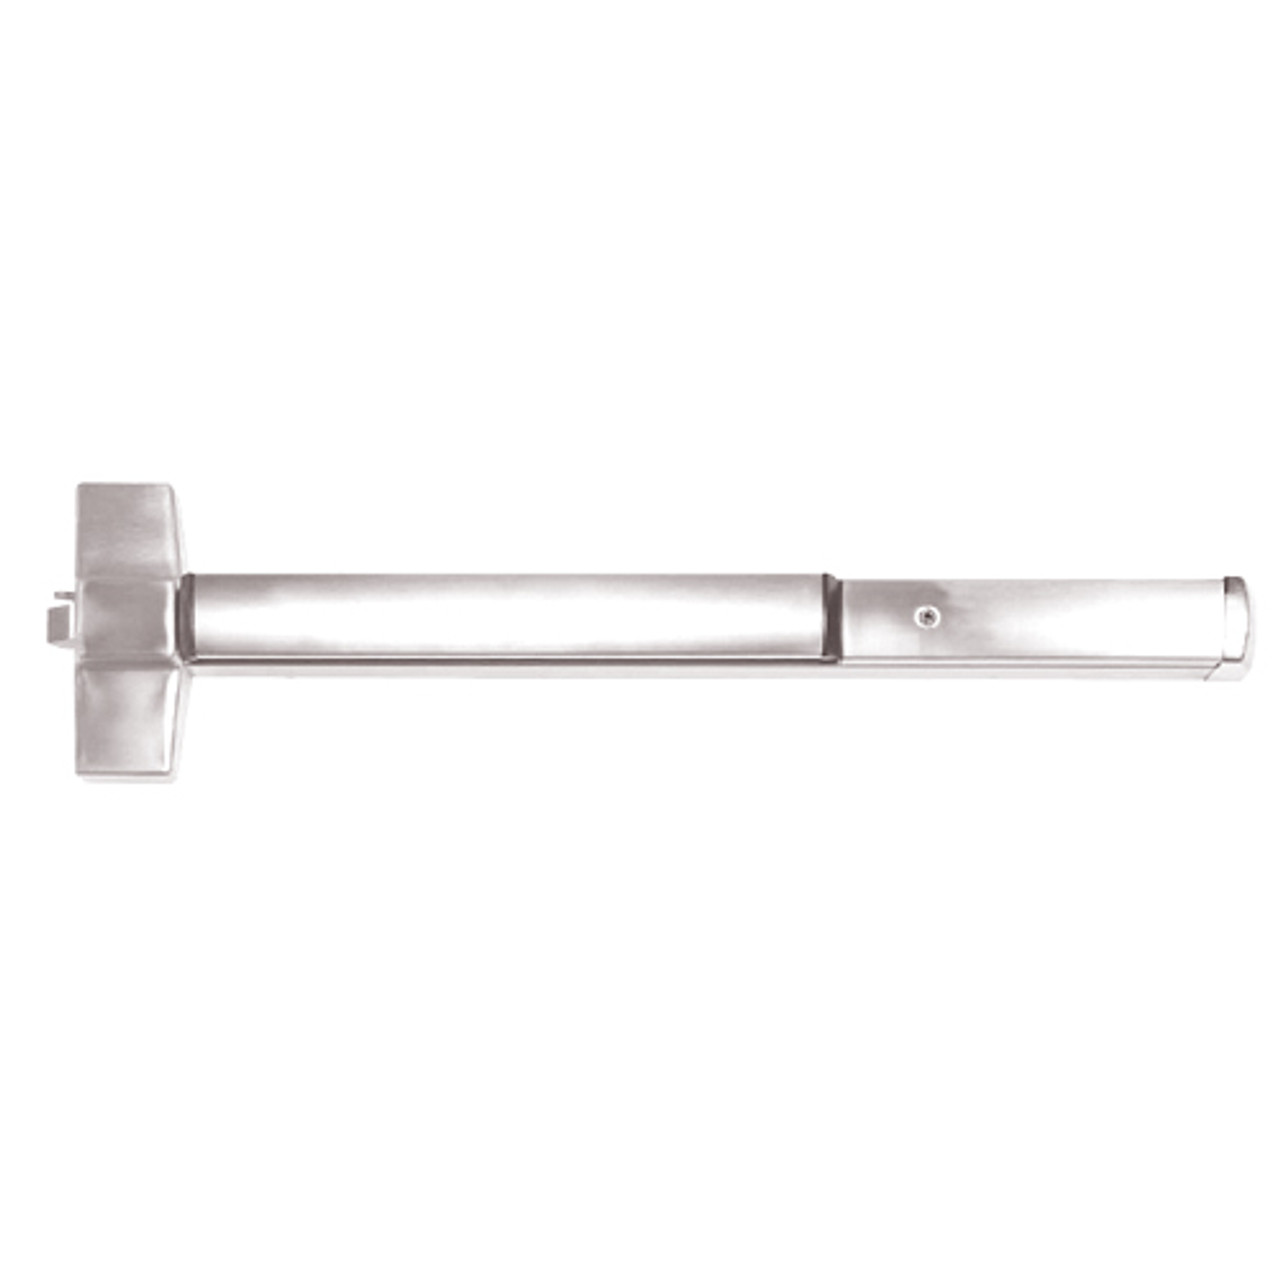 ED5200-629-MELR Corbin ED5200 Series Non Fire Rated Exit Device with Motor Latch Retraction in Bright Stainless Steel Finish